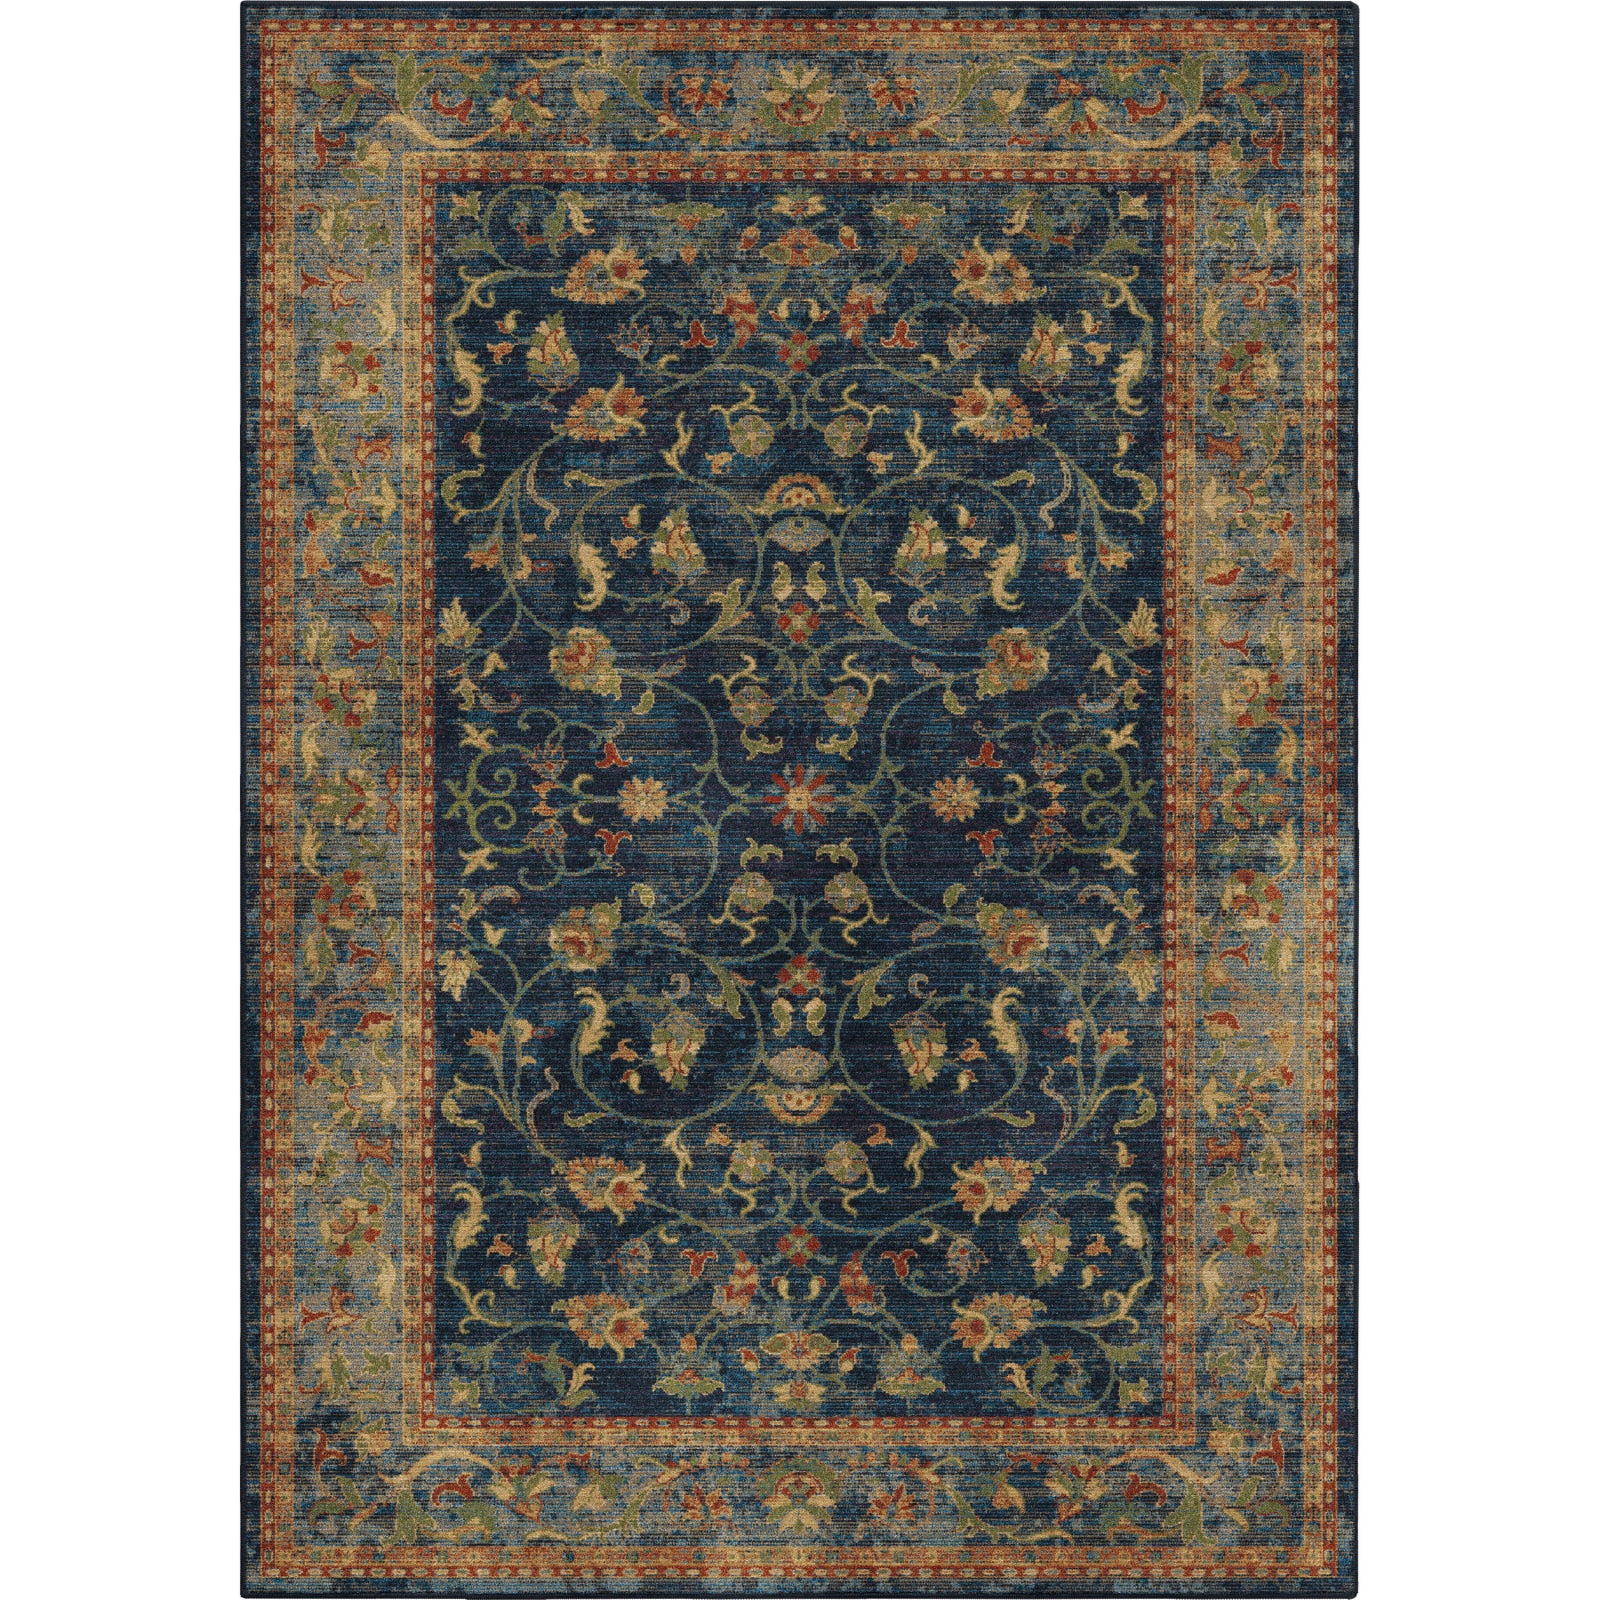 Orian Rugs Mosaic Floral Trail Navy Area Rug main image